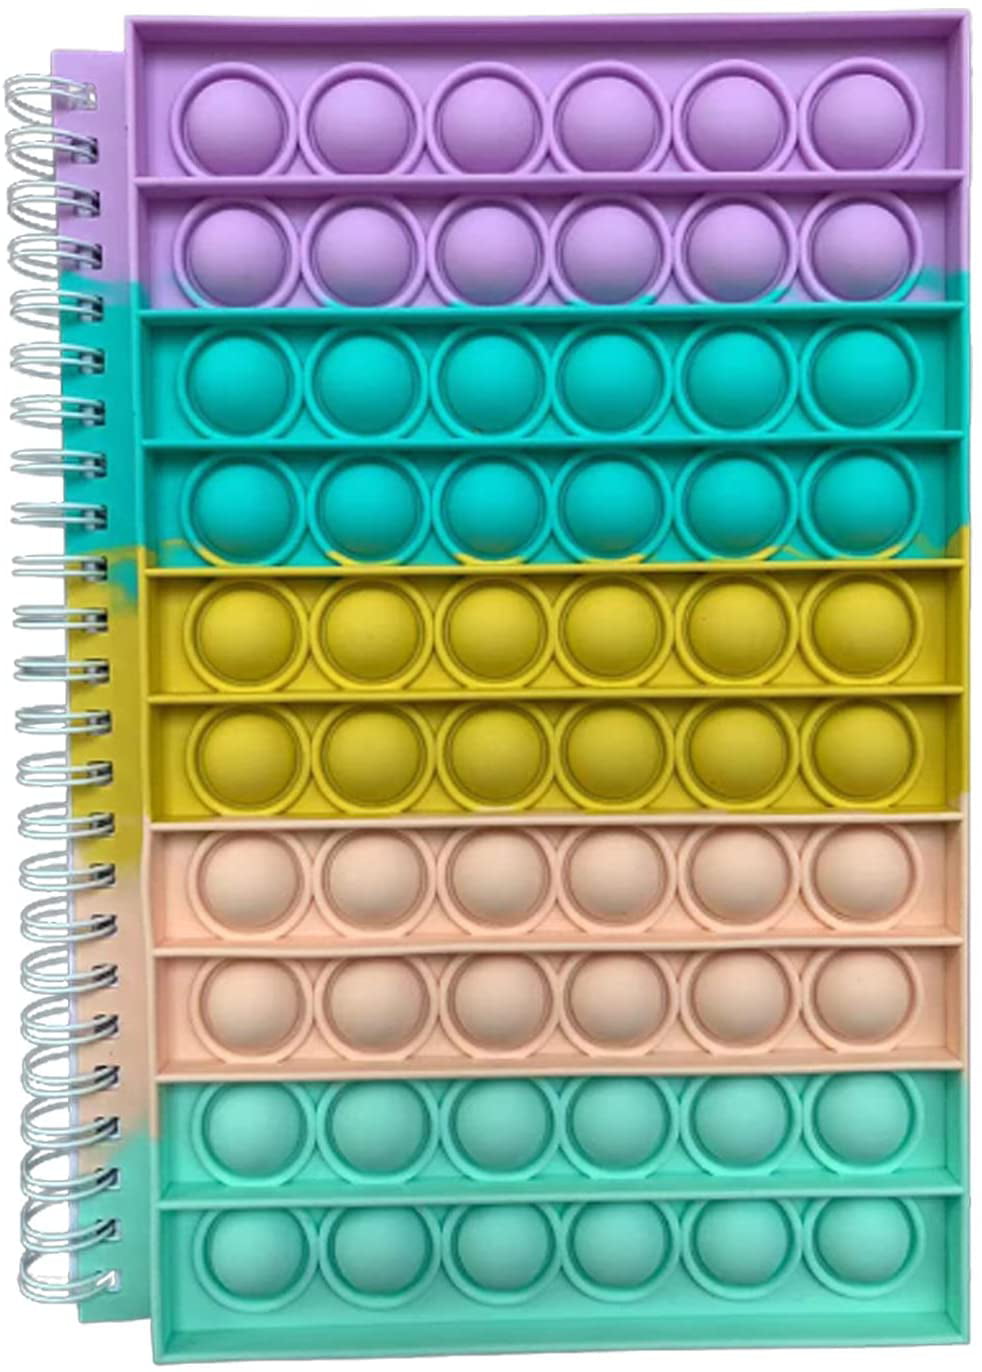 12 Packs Pop Poppers It Pocket Notebook Tiny Memo Pads Desk Toy 3x5” Inch Party Favors Bulk Spiral Mini Notebook School Supplies Gifts for Boys Girls Kids Adults Classroom Home Office Accessories 